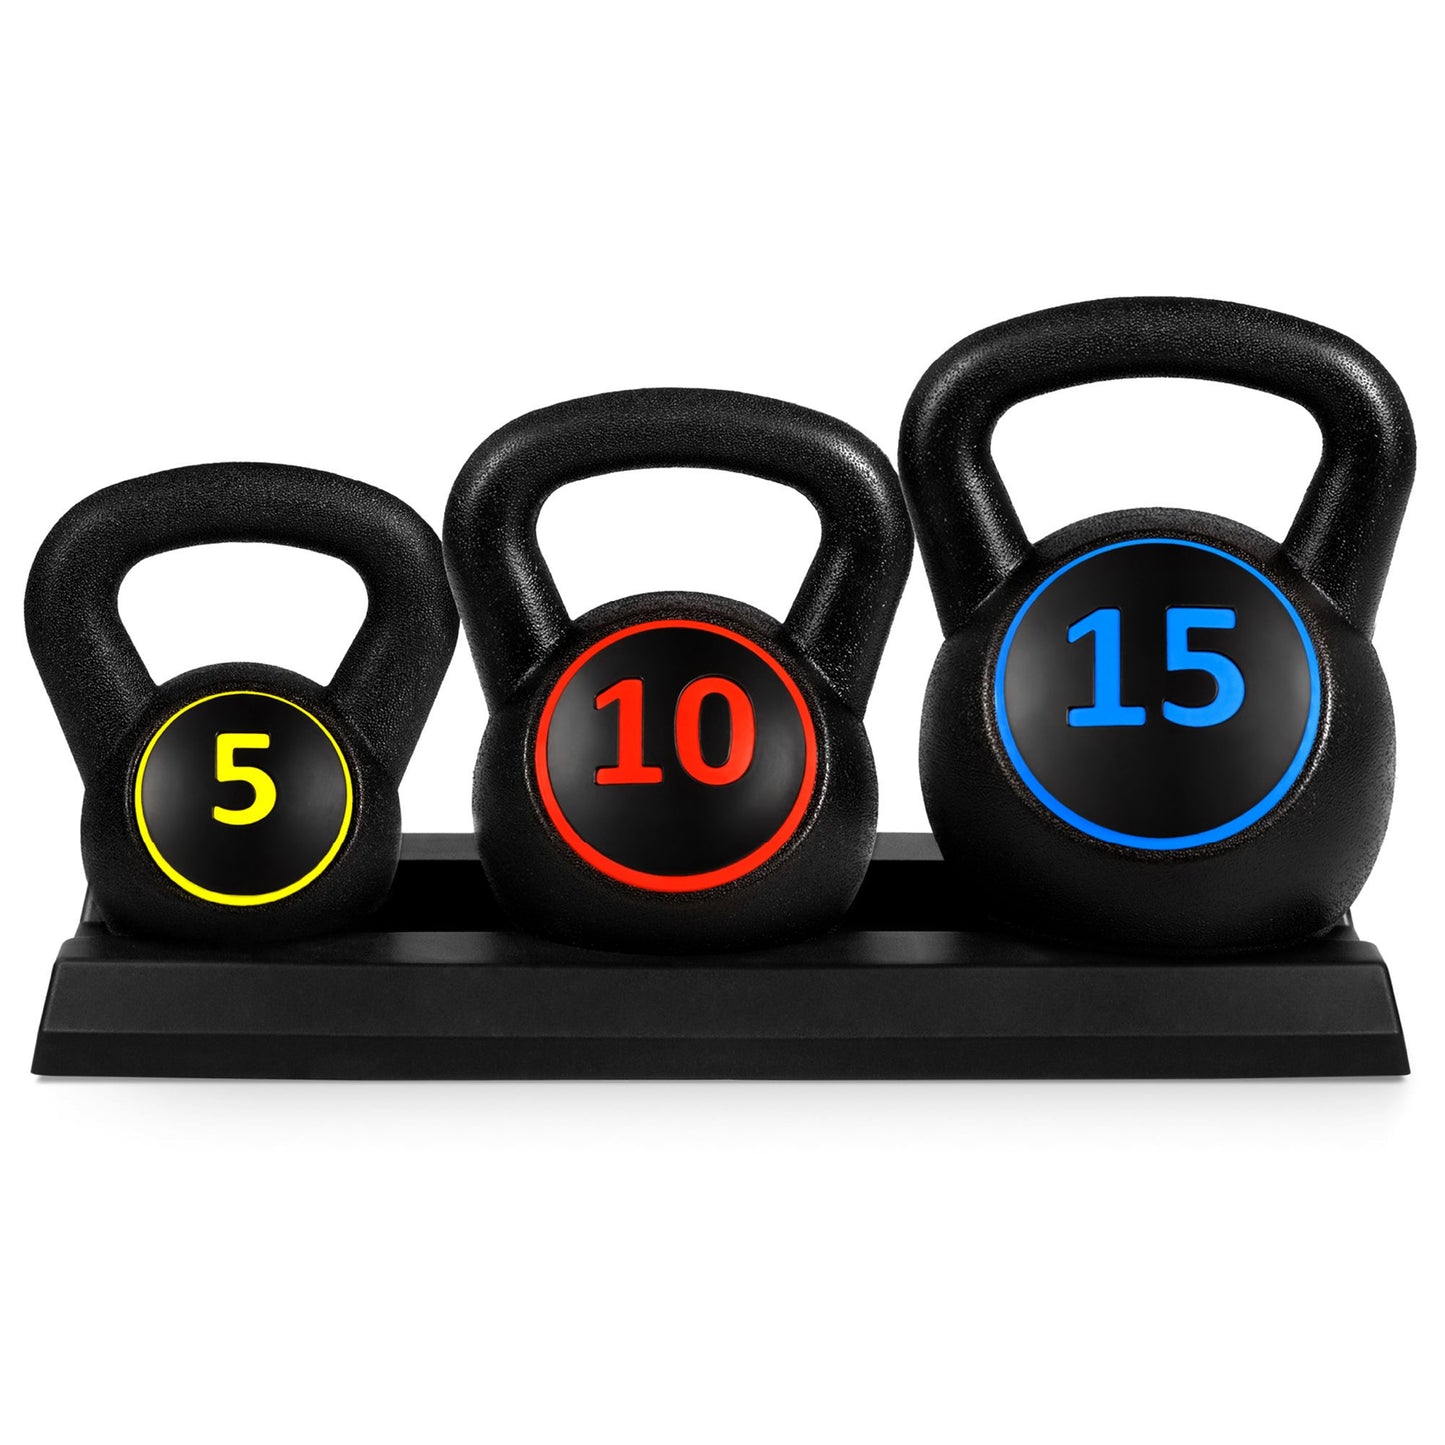 3-Piece Kettlebell Exercise Fitness Weight Set w/ Storage Rack